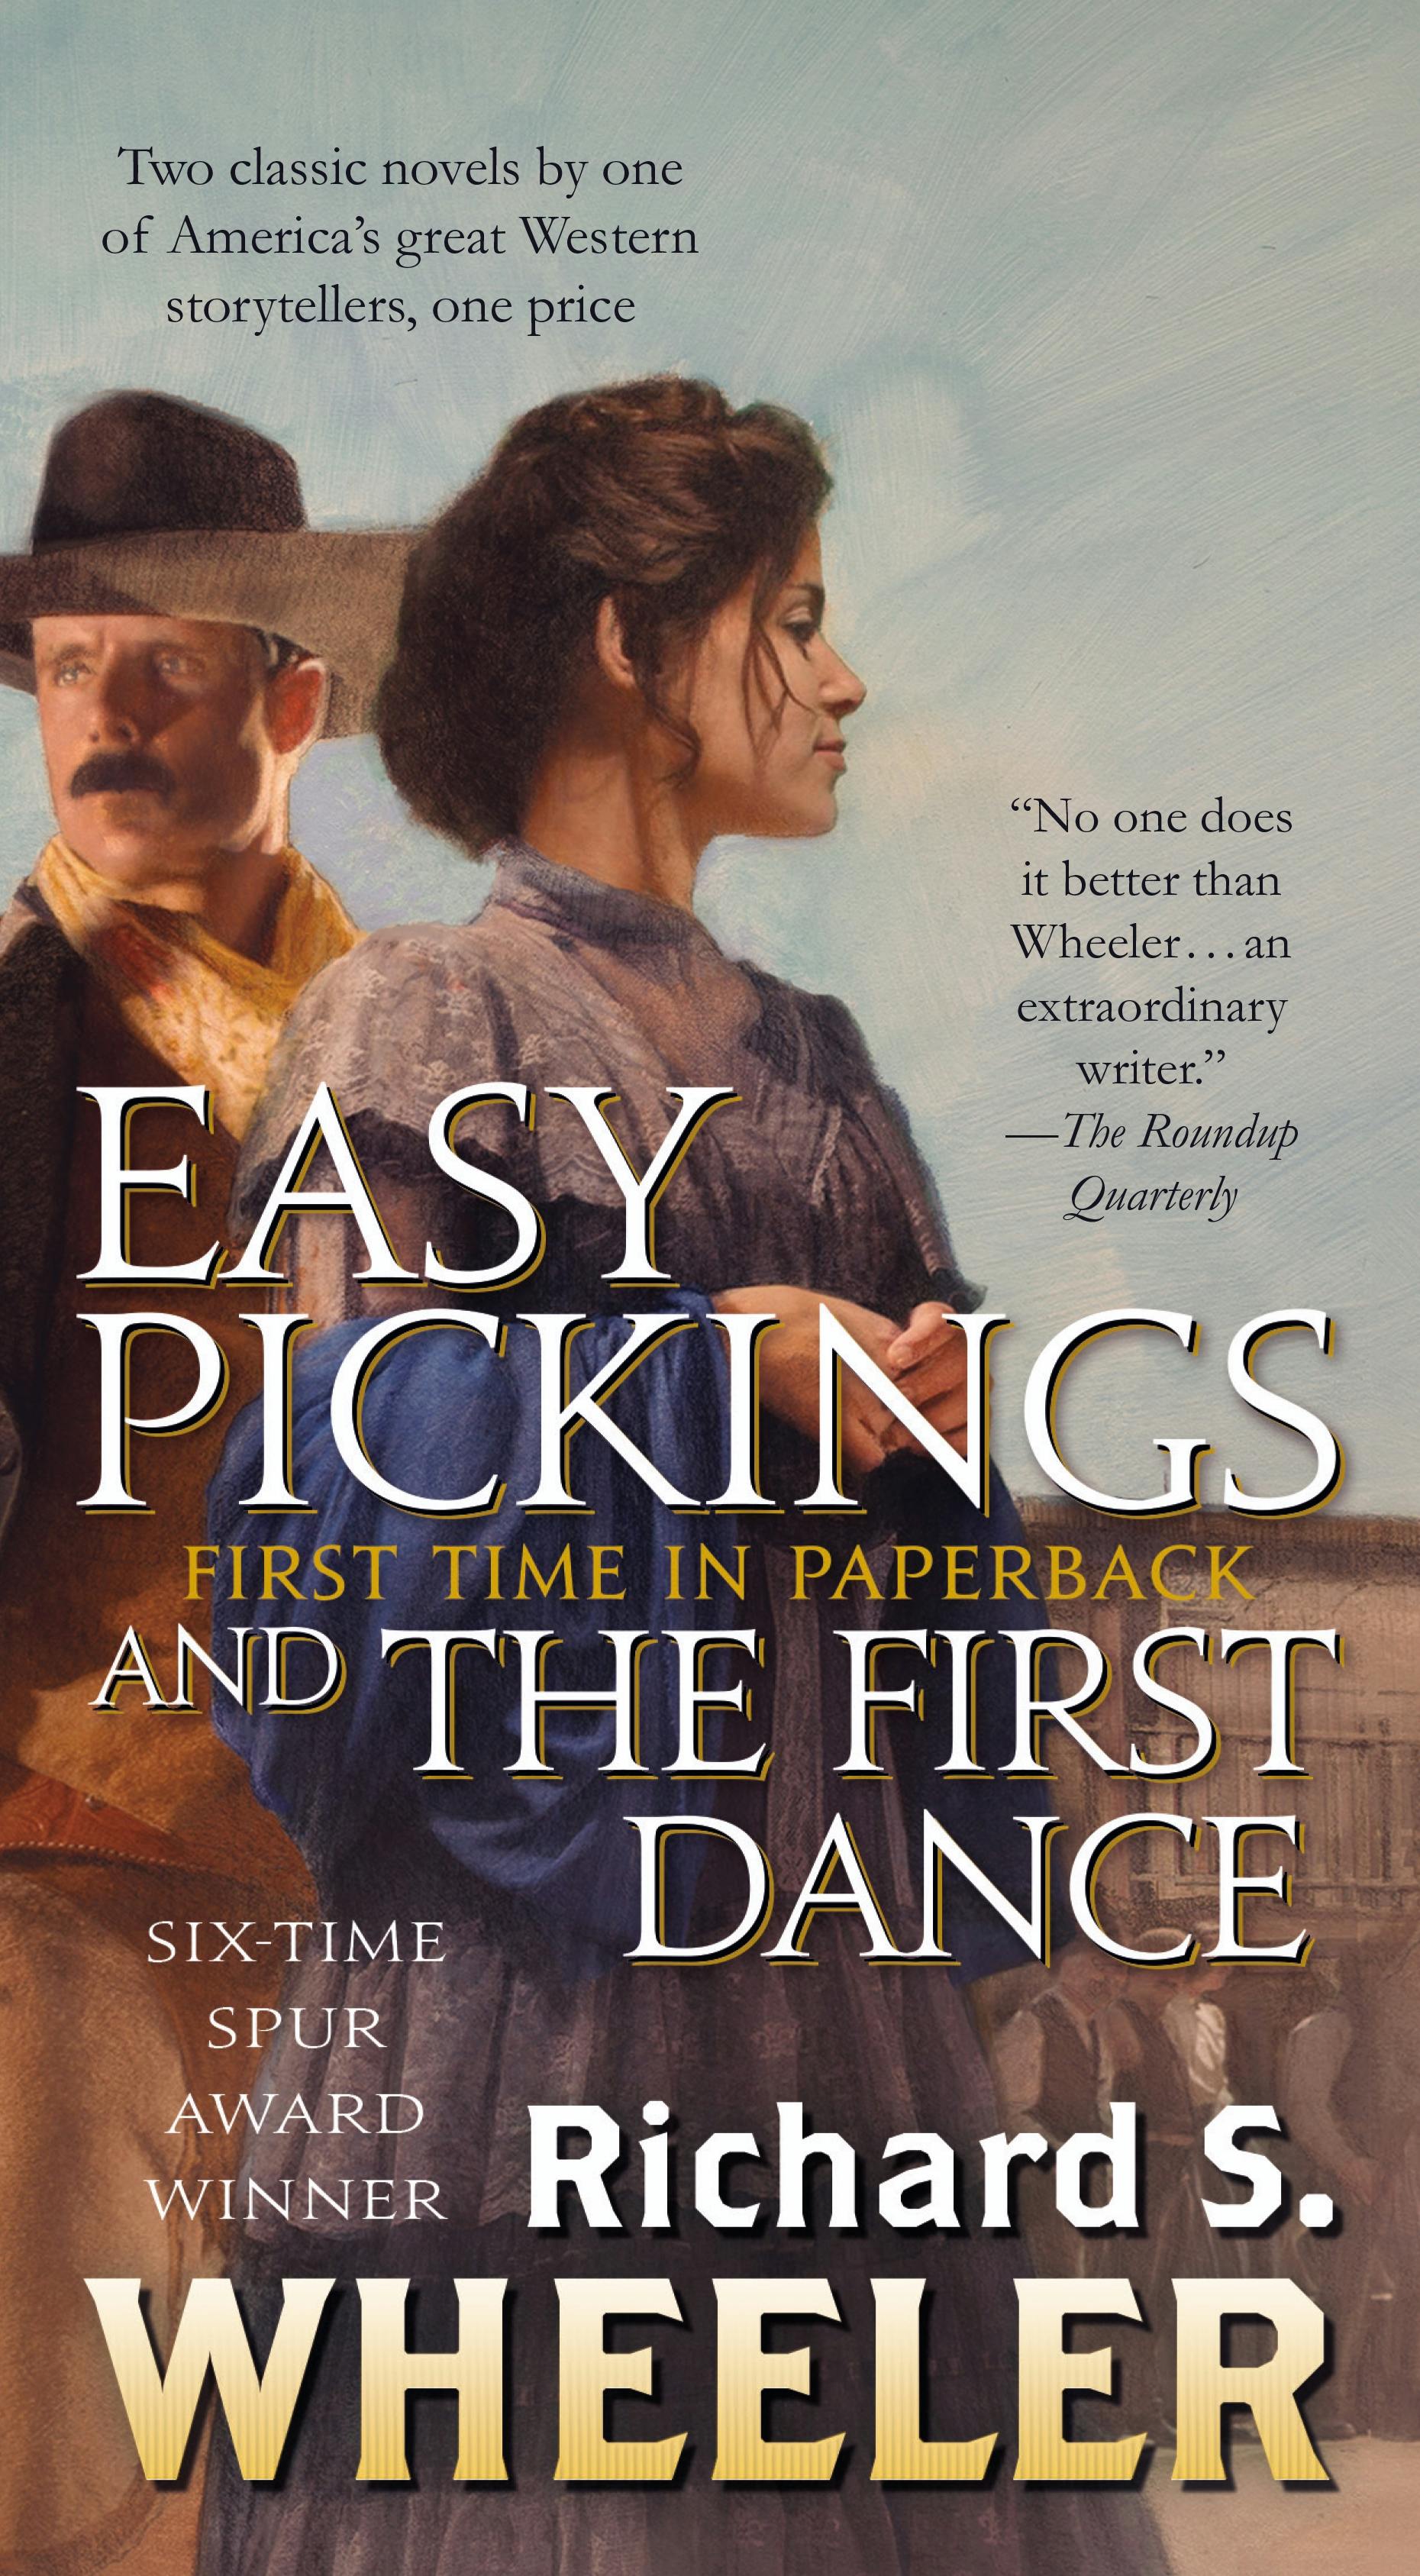 Cover for the book titled as: Easy Pickings and The First Dance